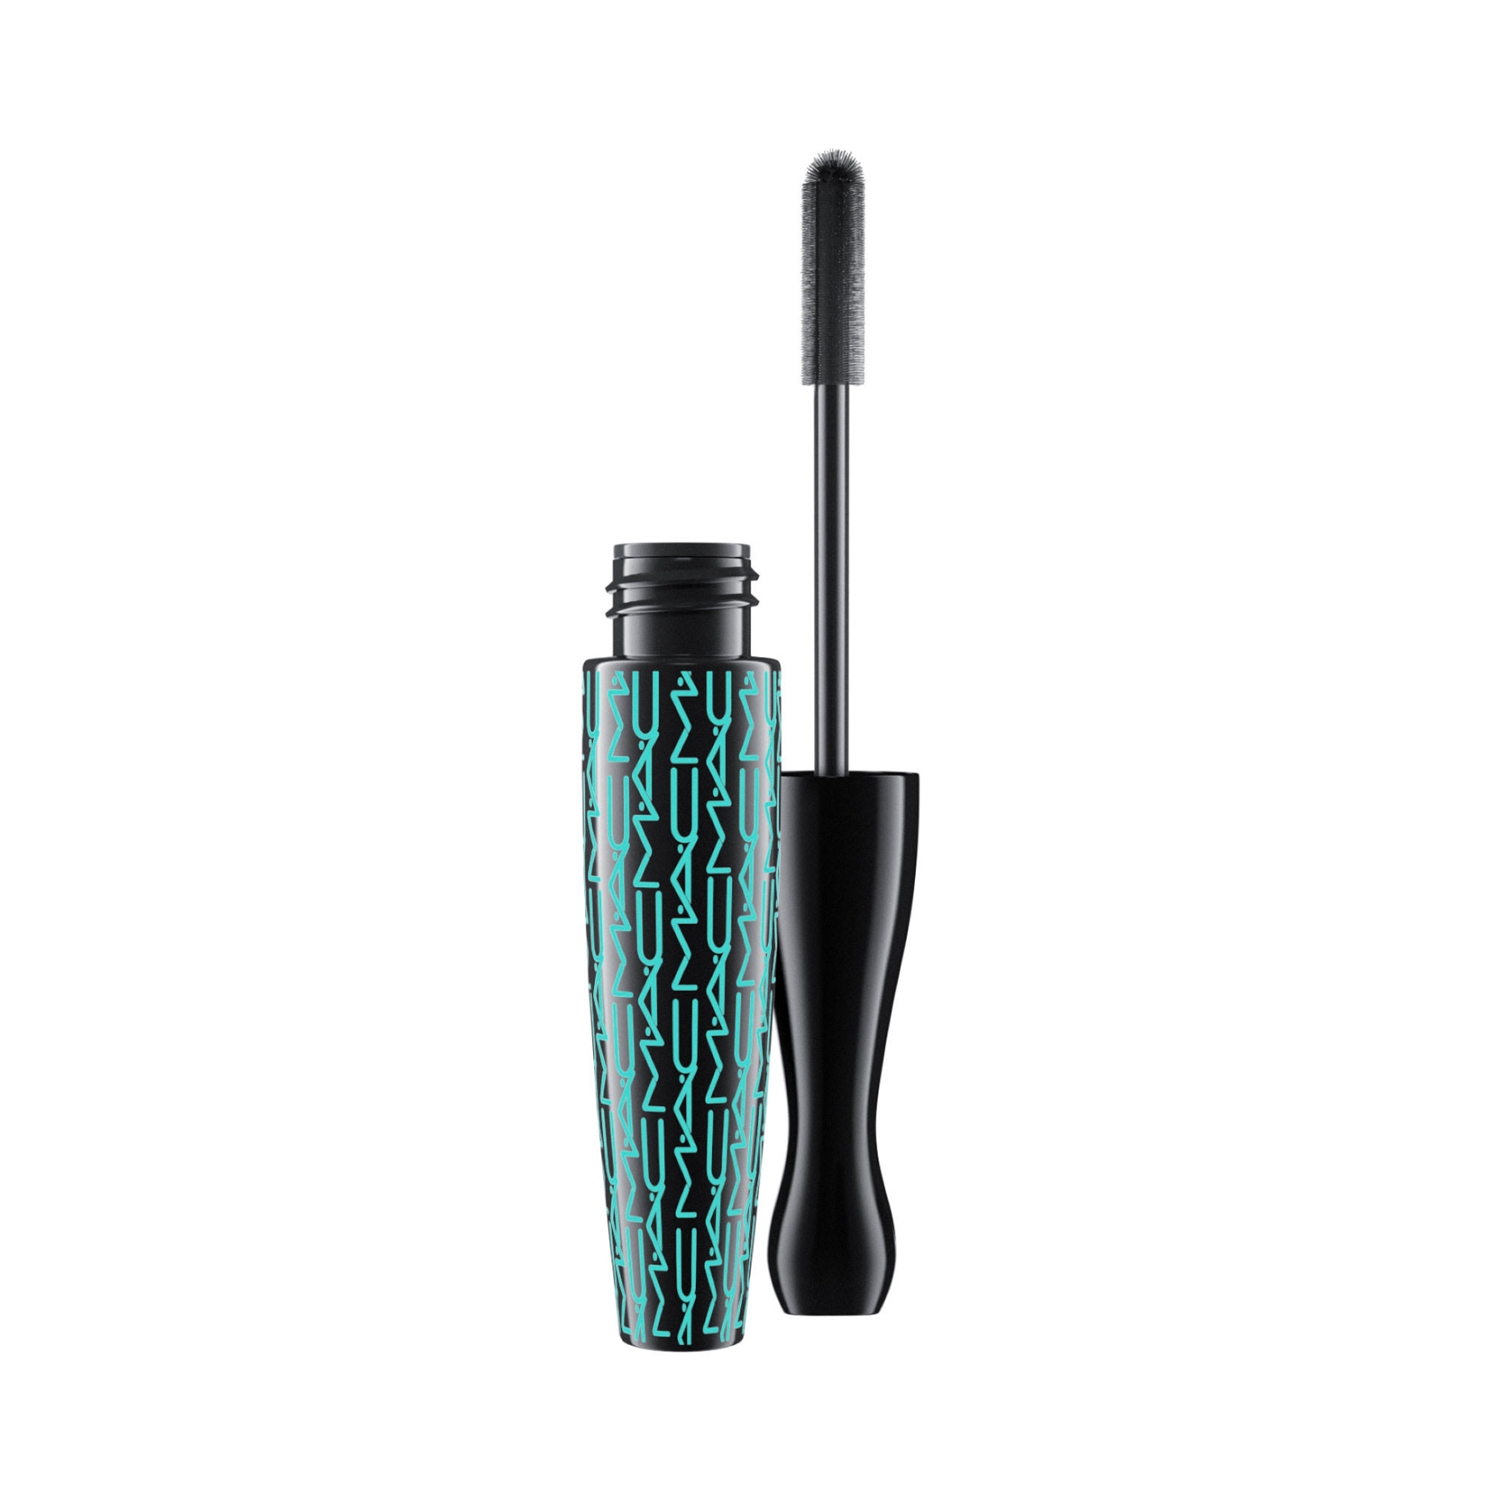 M.A.C In Extreme Dimension Waterproof Mascara - Black (13.39g)